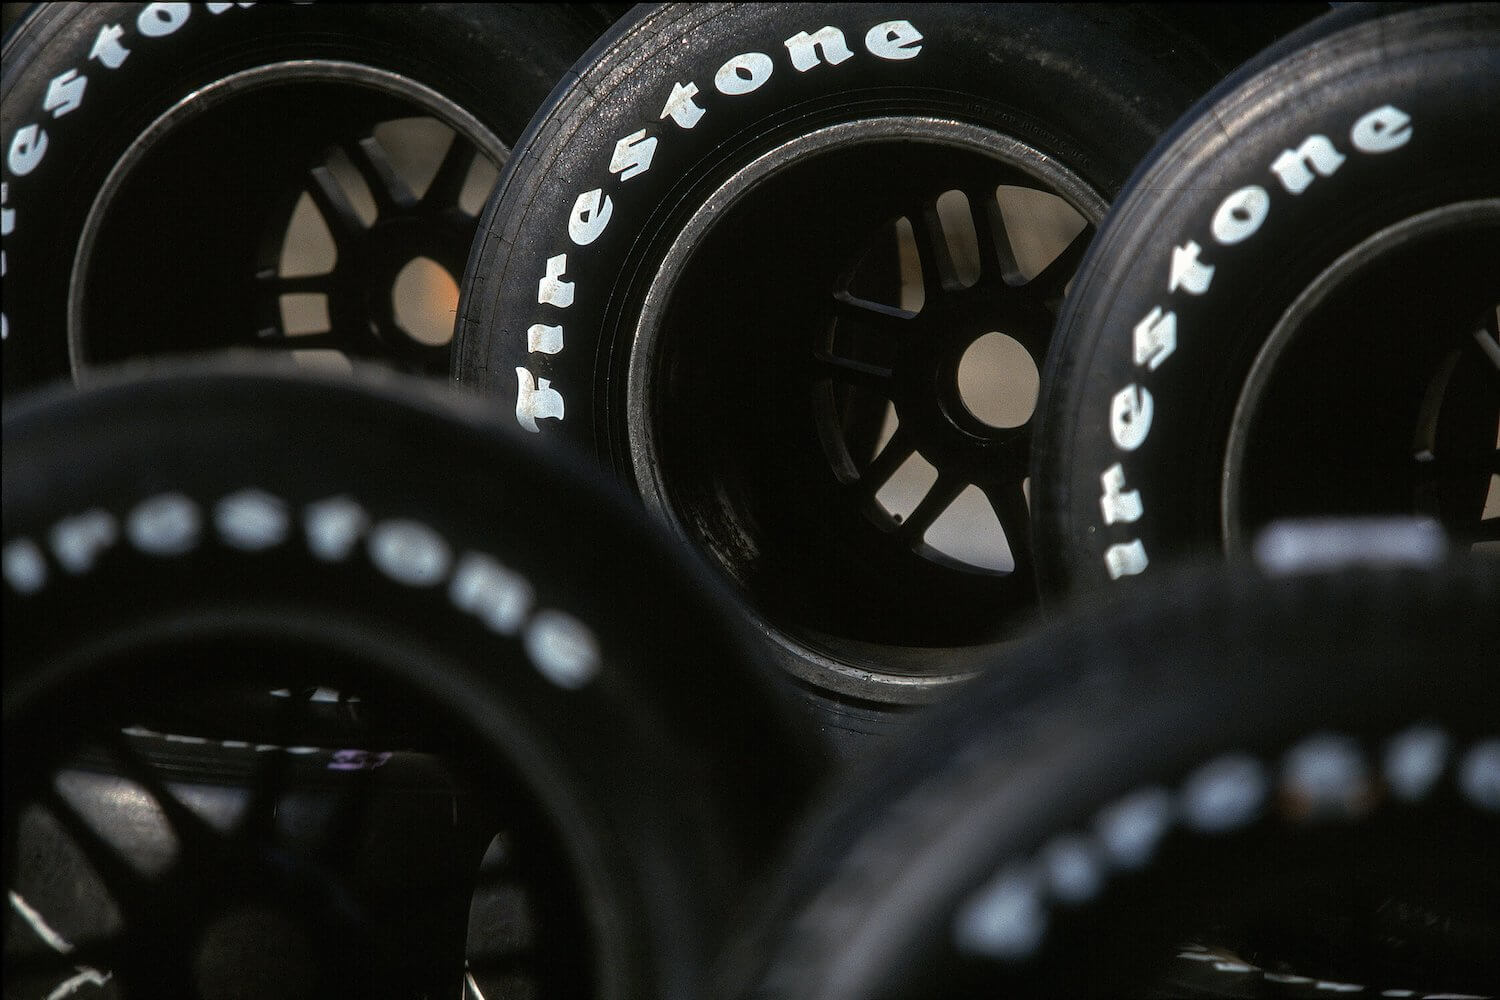 Firestone racing tires lined up at the Firestone Grand Prix in Monterrey California.